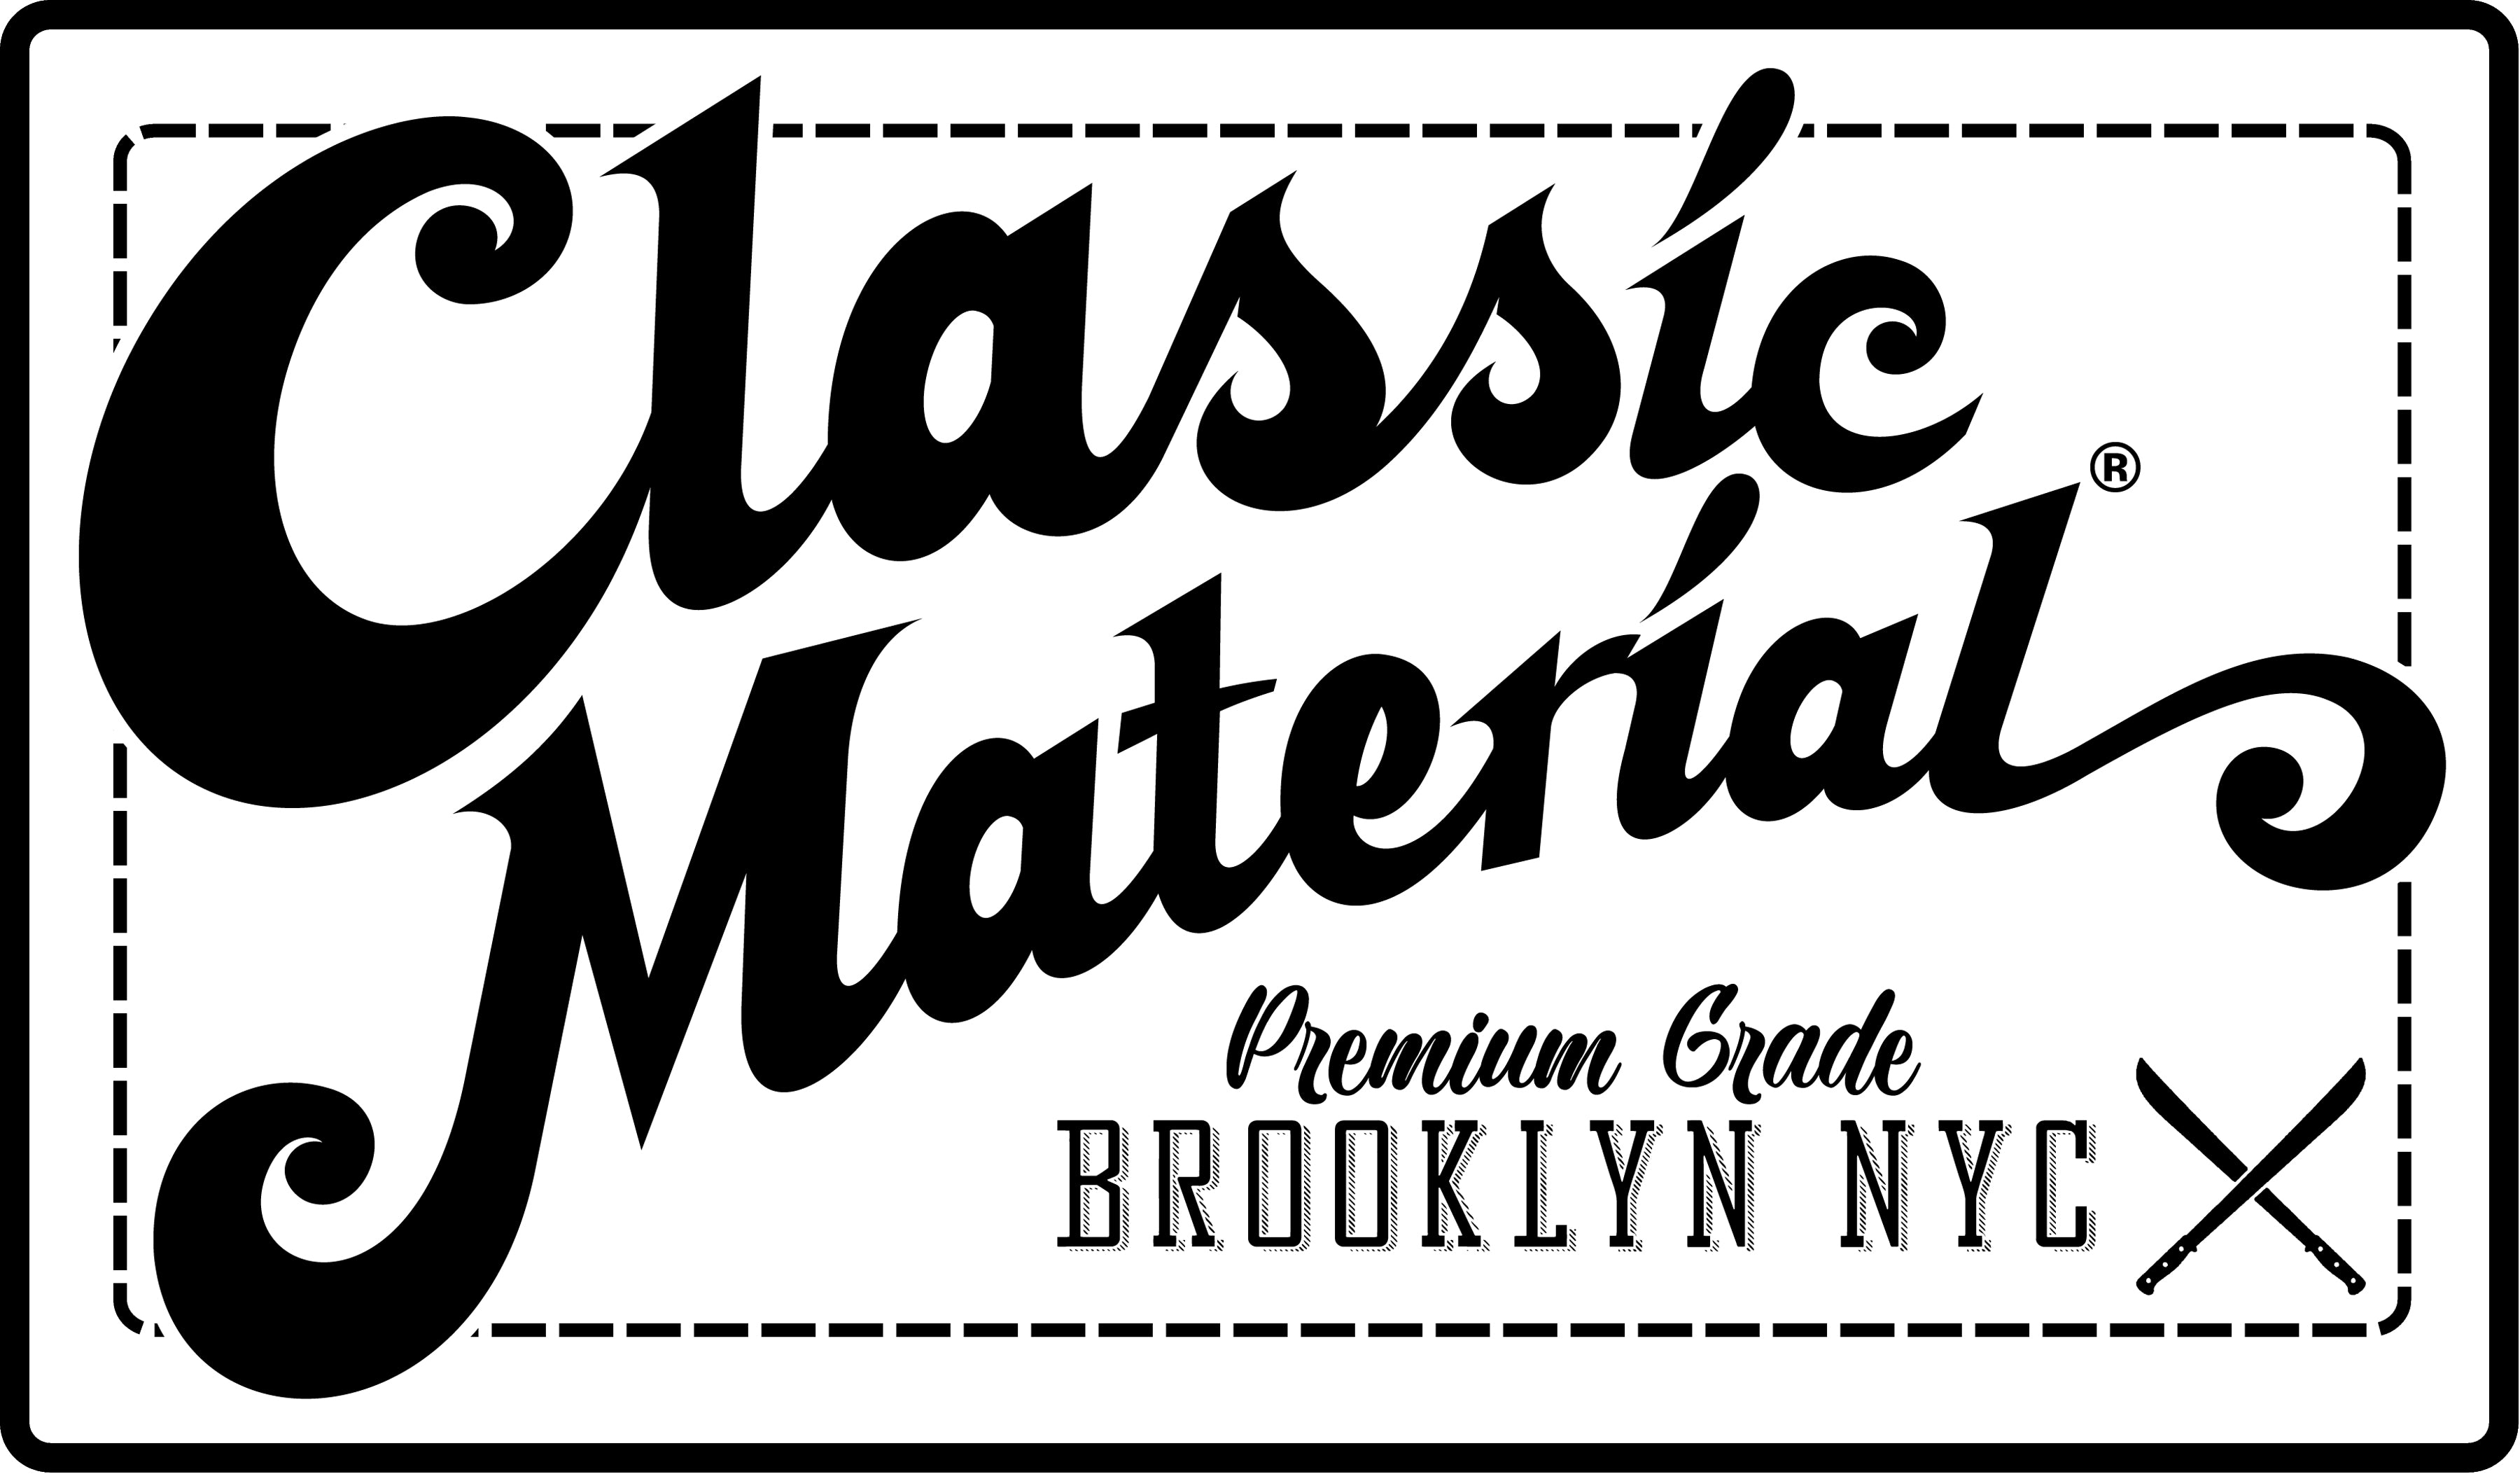 Classic Material NY, Classic never runs out of style, it creates it.